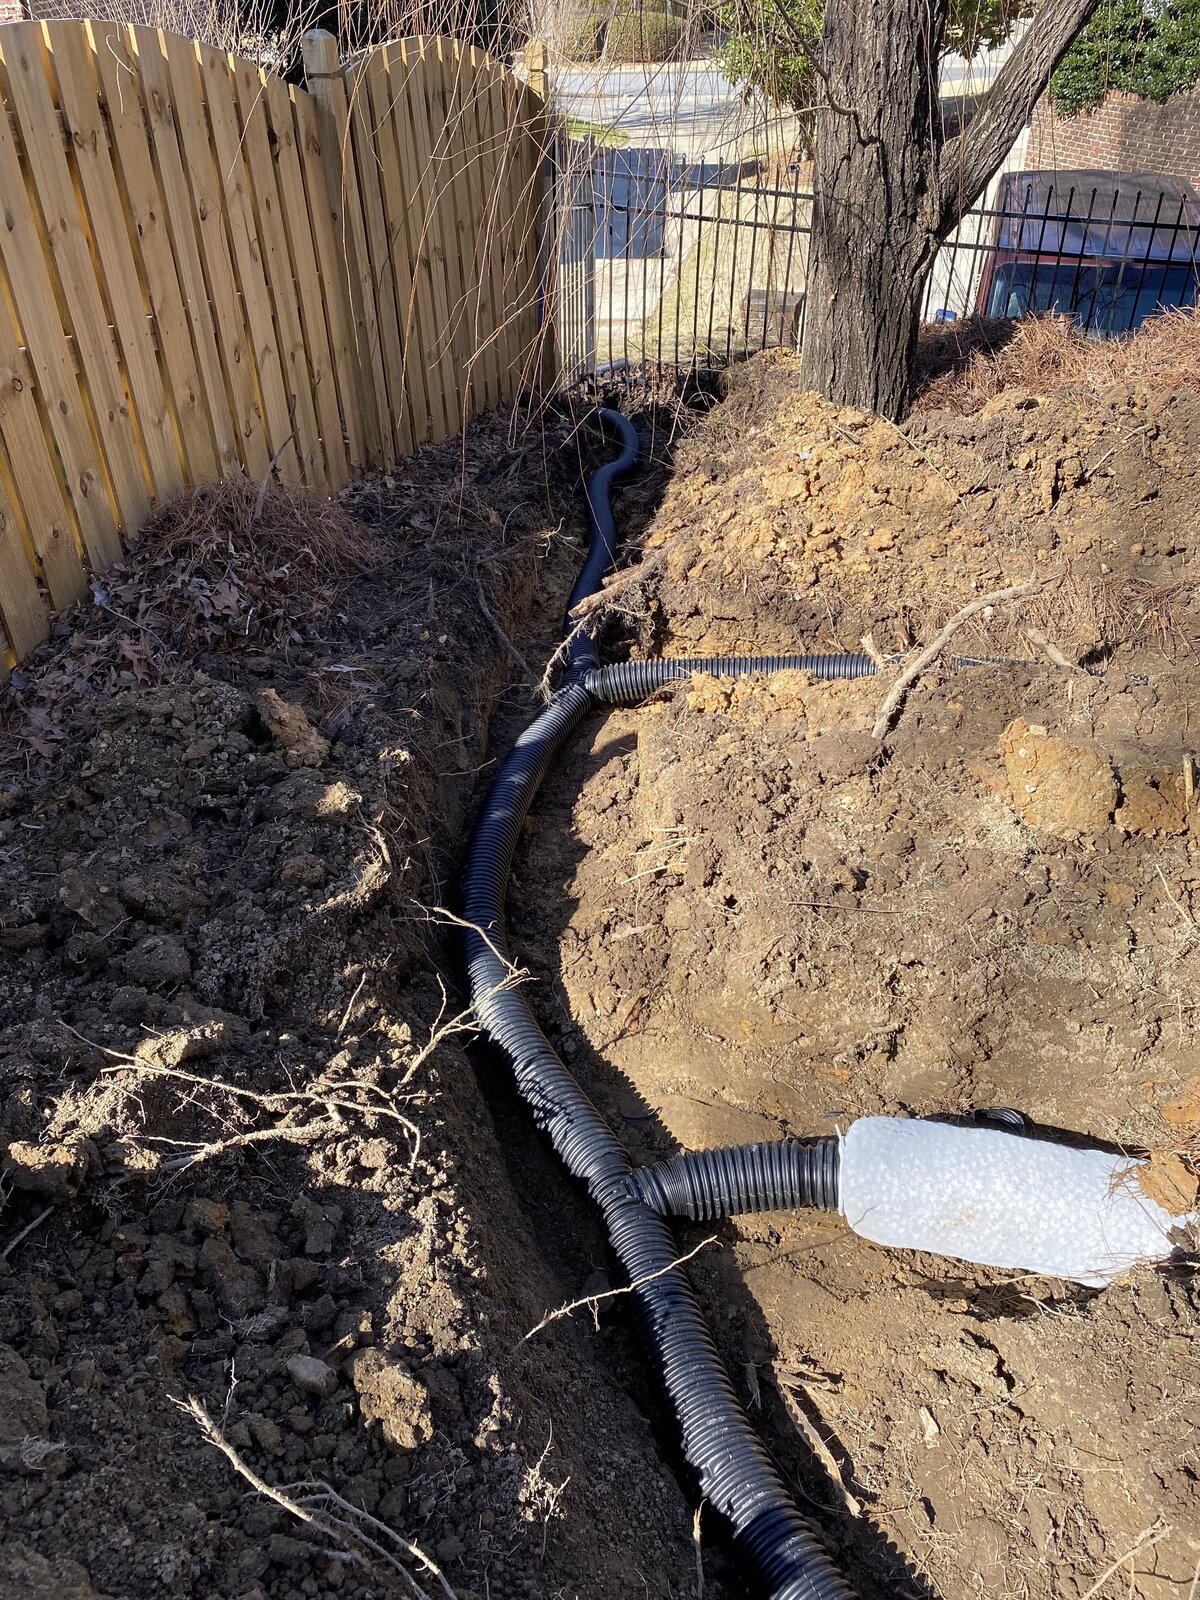 drainage-hoses-in-dirt-trench-next-to-wodden-fence